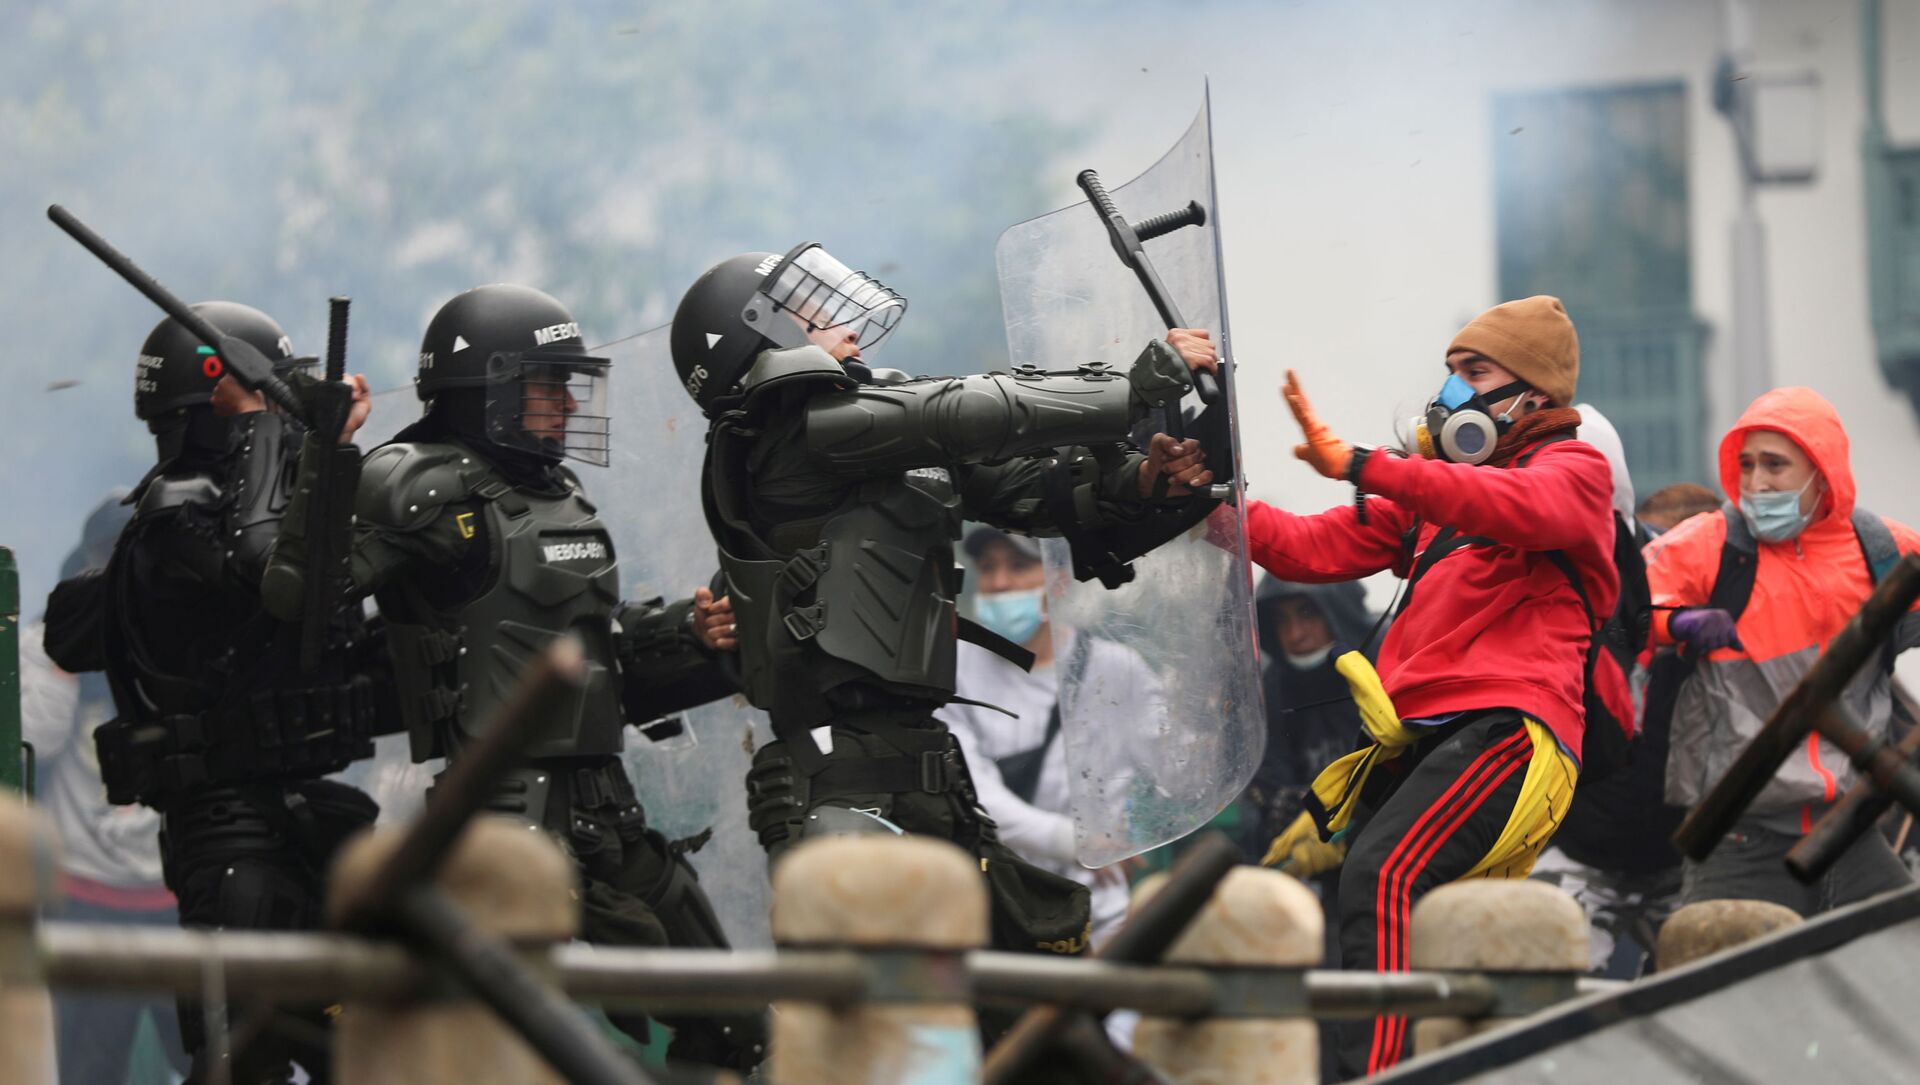 Demonstrators clash with members of security forces during a protest against the tax reform of President Ivan Duque's government in Bogota, Colombia April 28, 2021 - Sputnik International, 1920, 29.04.2021